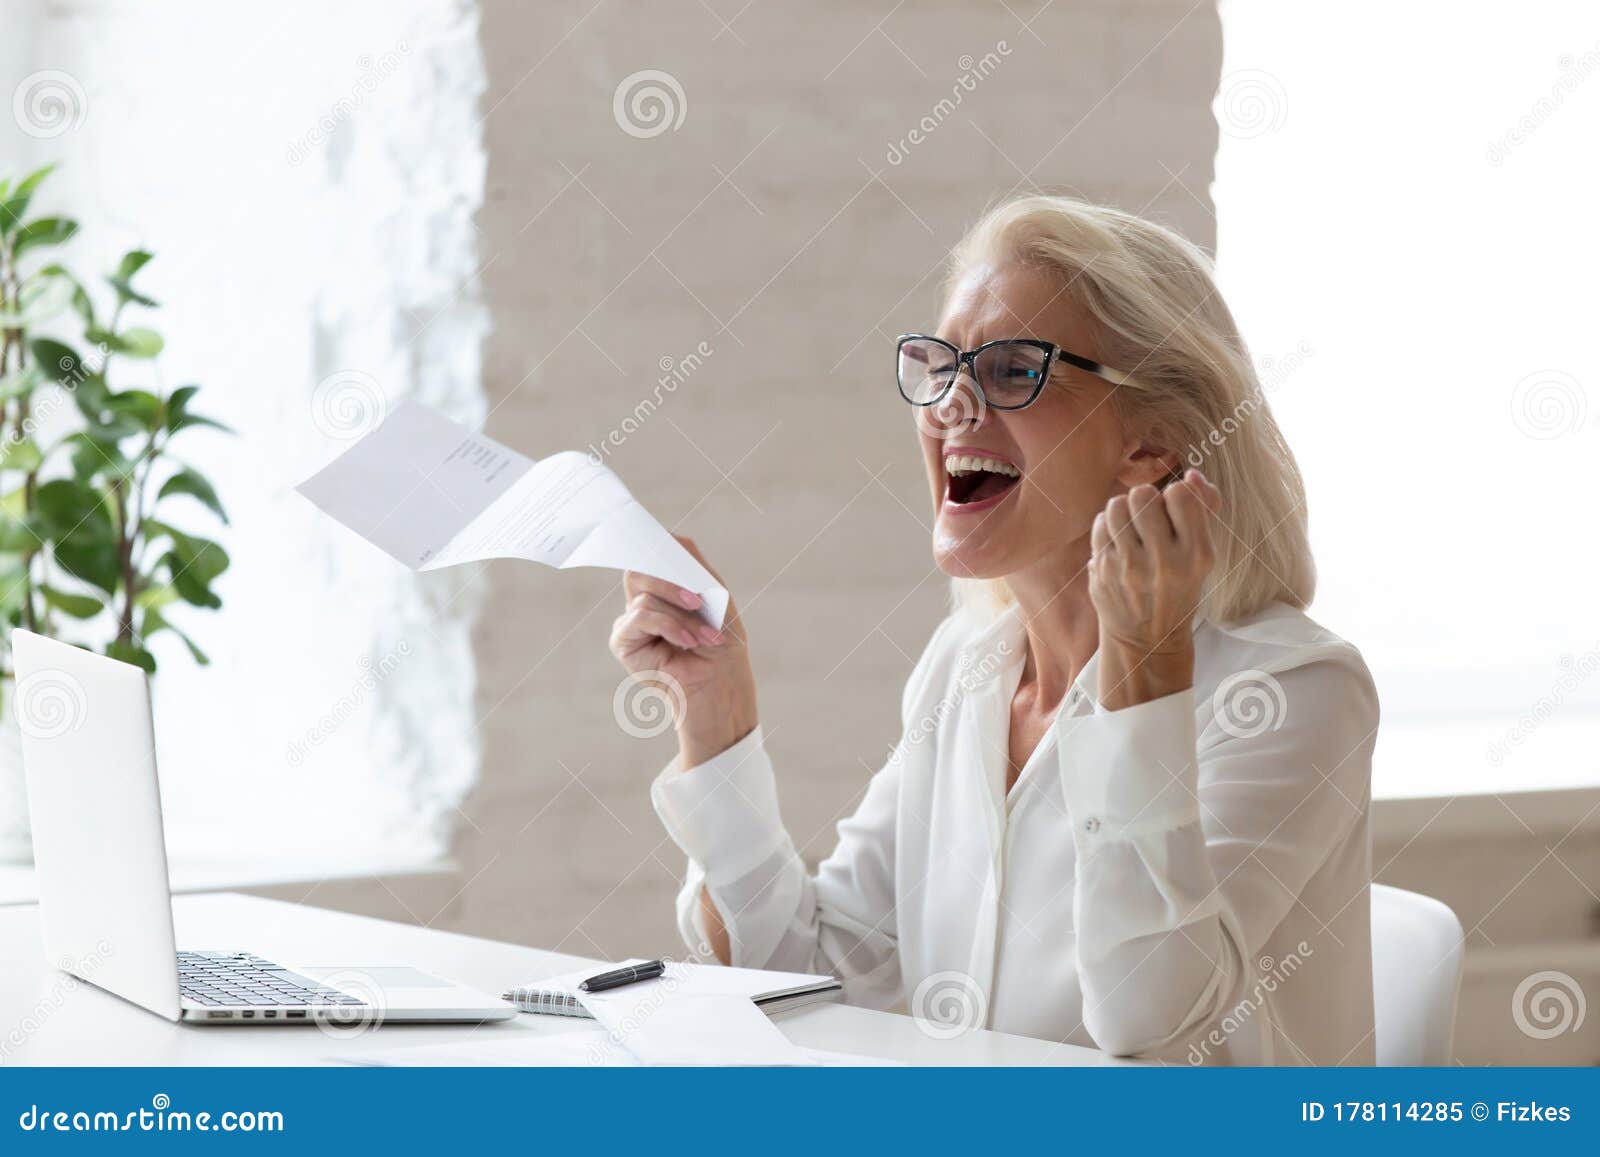 happy smiling 60 years old businesswoman using laptop.